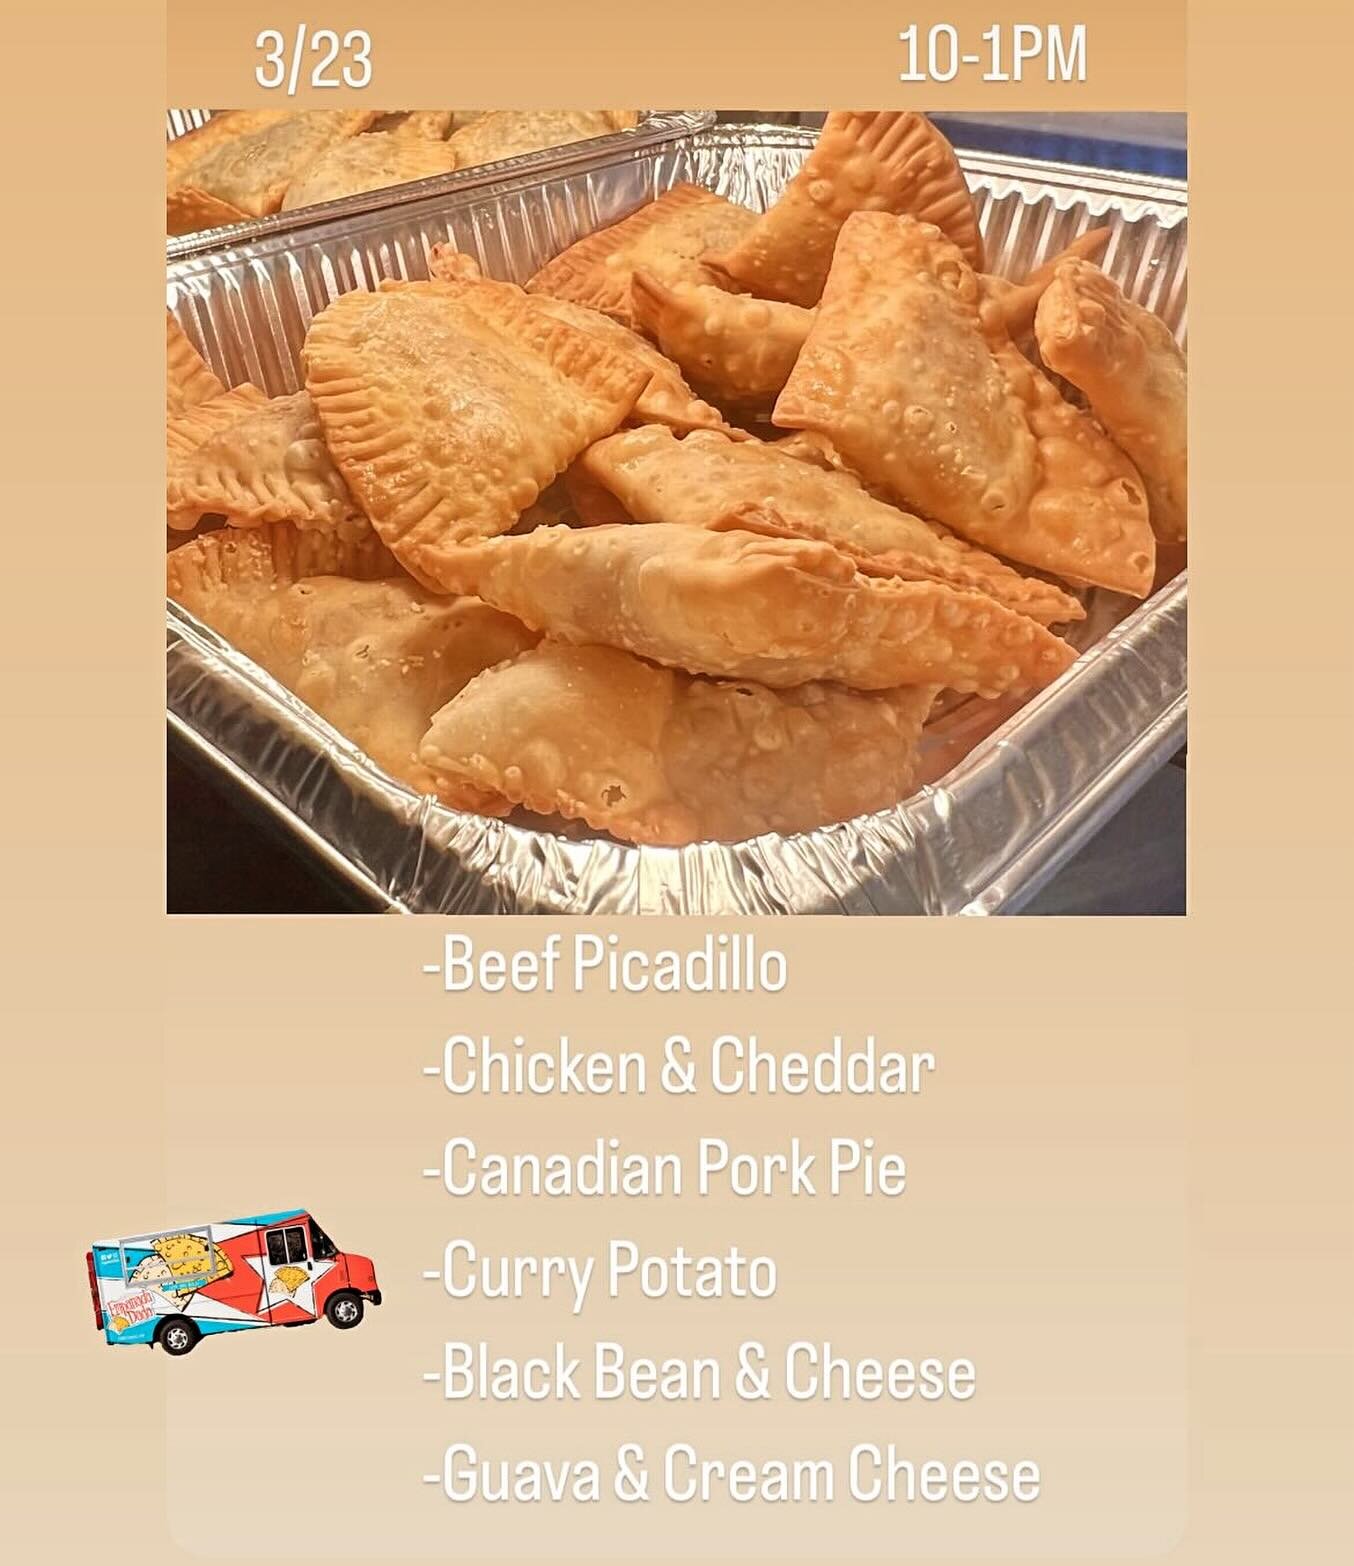 Today&rsquo;s menu for lunch. Sat March 23 10-1:00 🥟